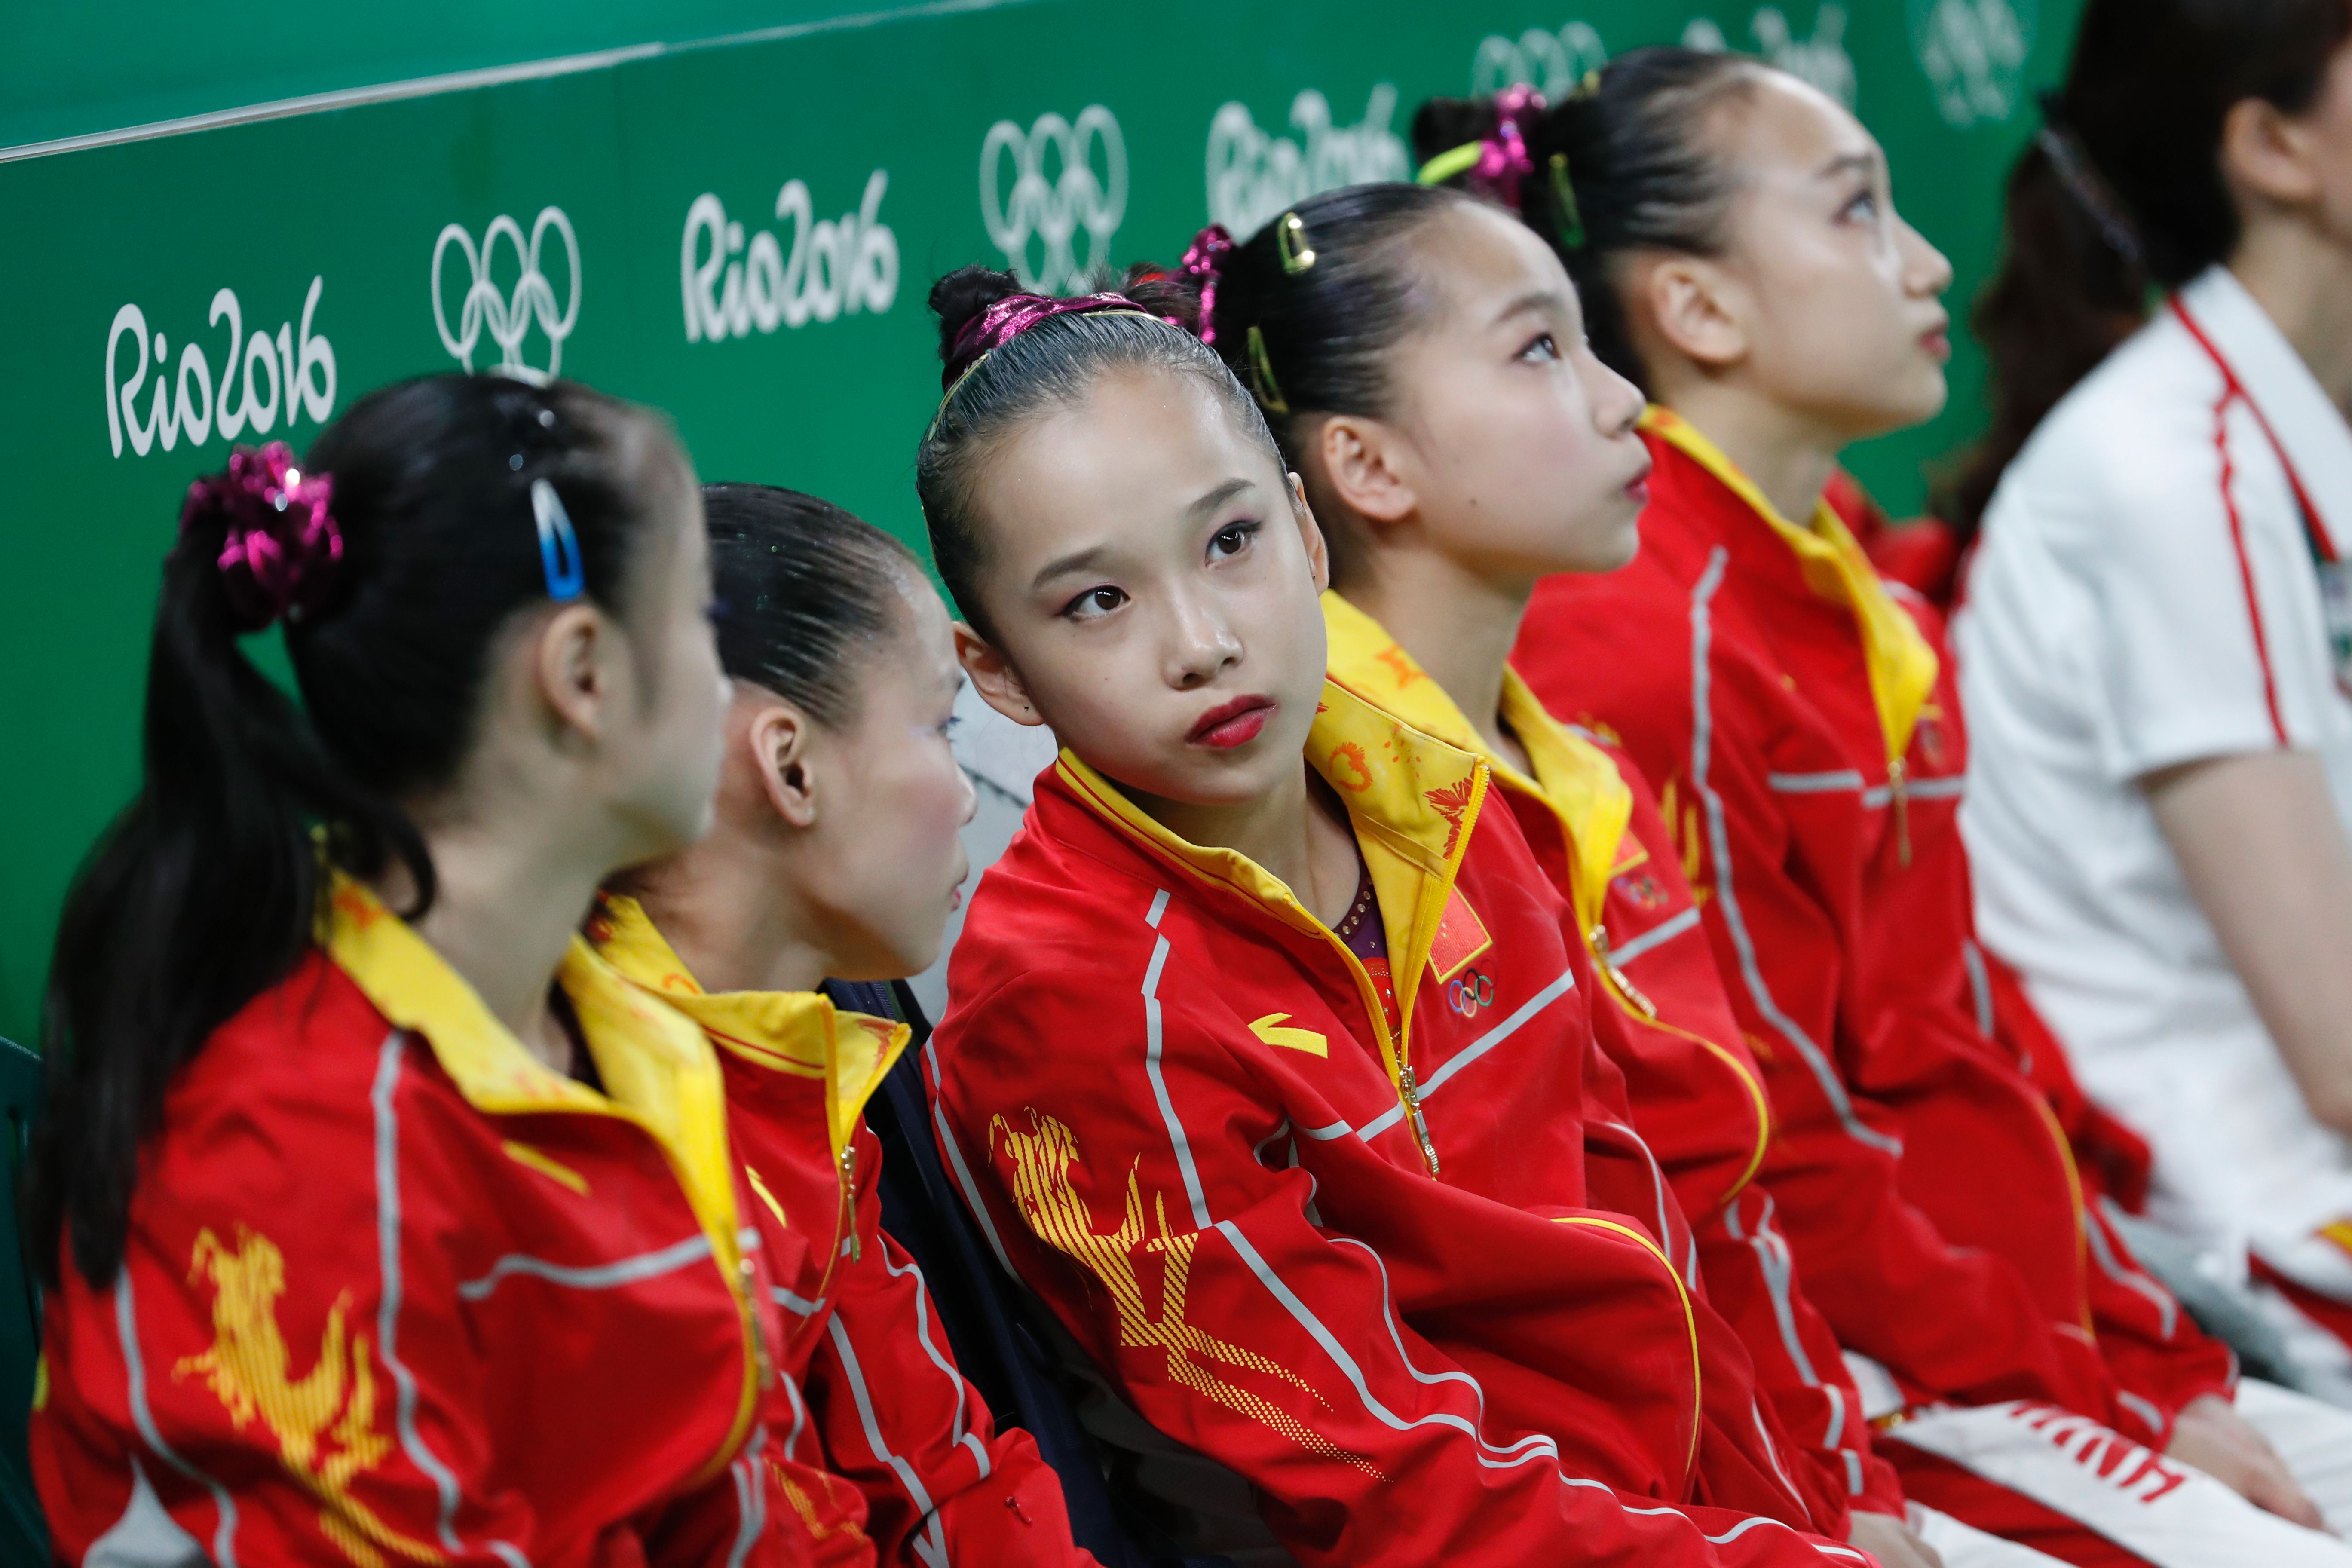 The Ages Of The Chinese Gymnastics Team Members Shouldn T Matter At The Rio Olympics